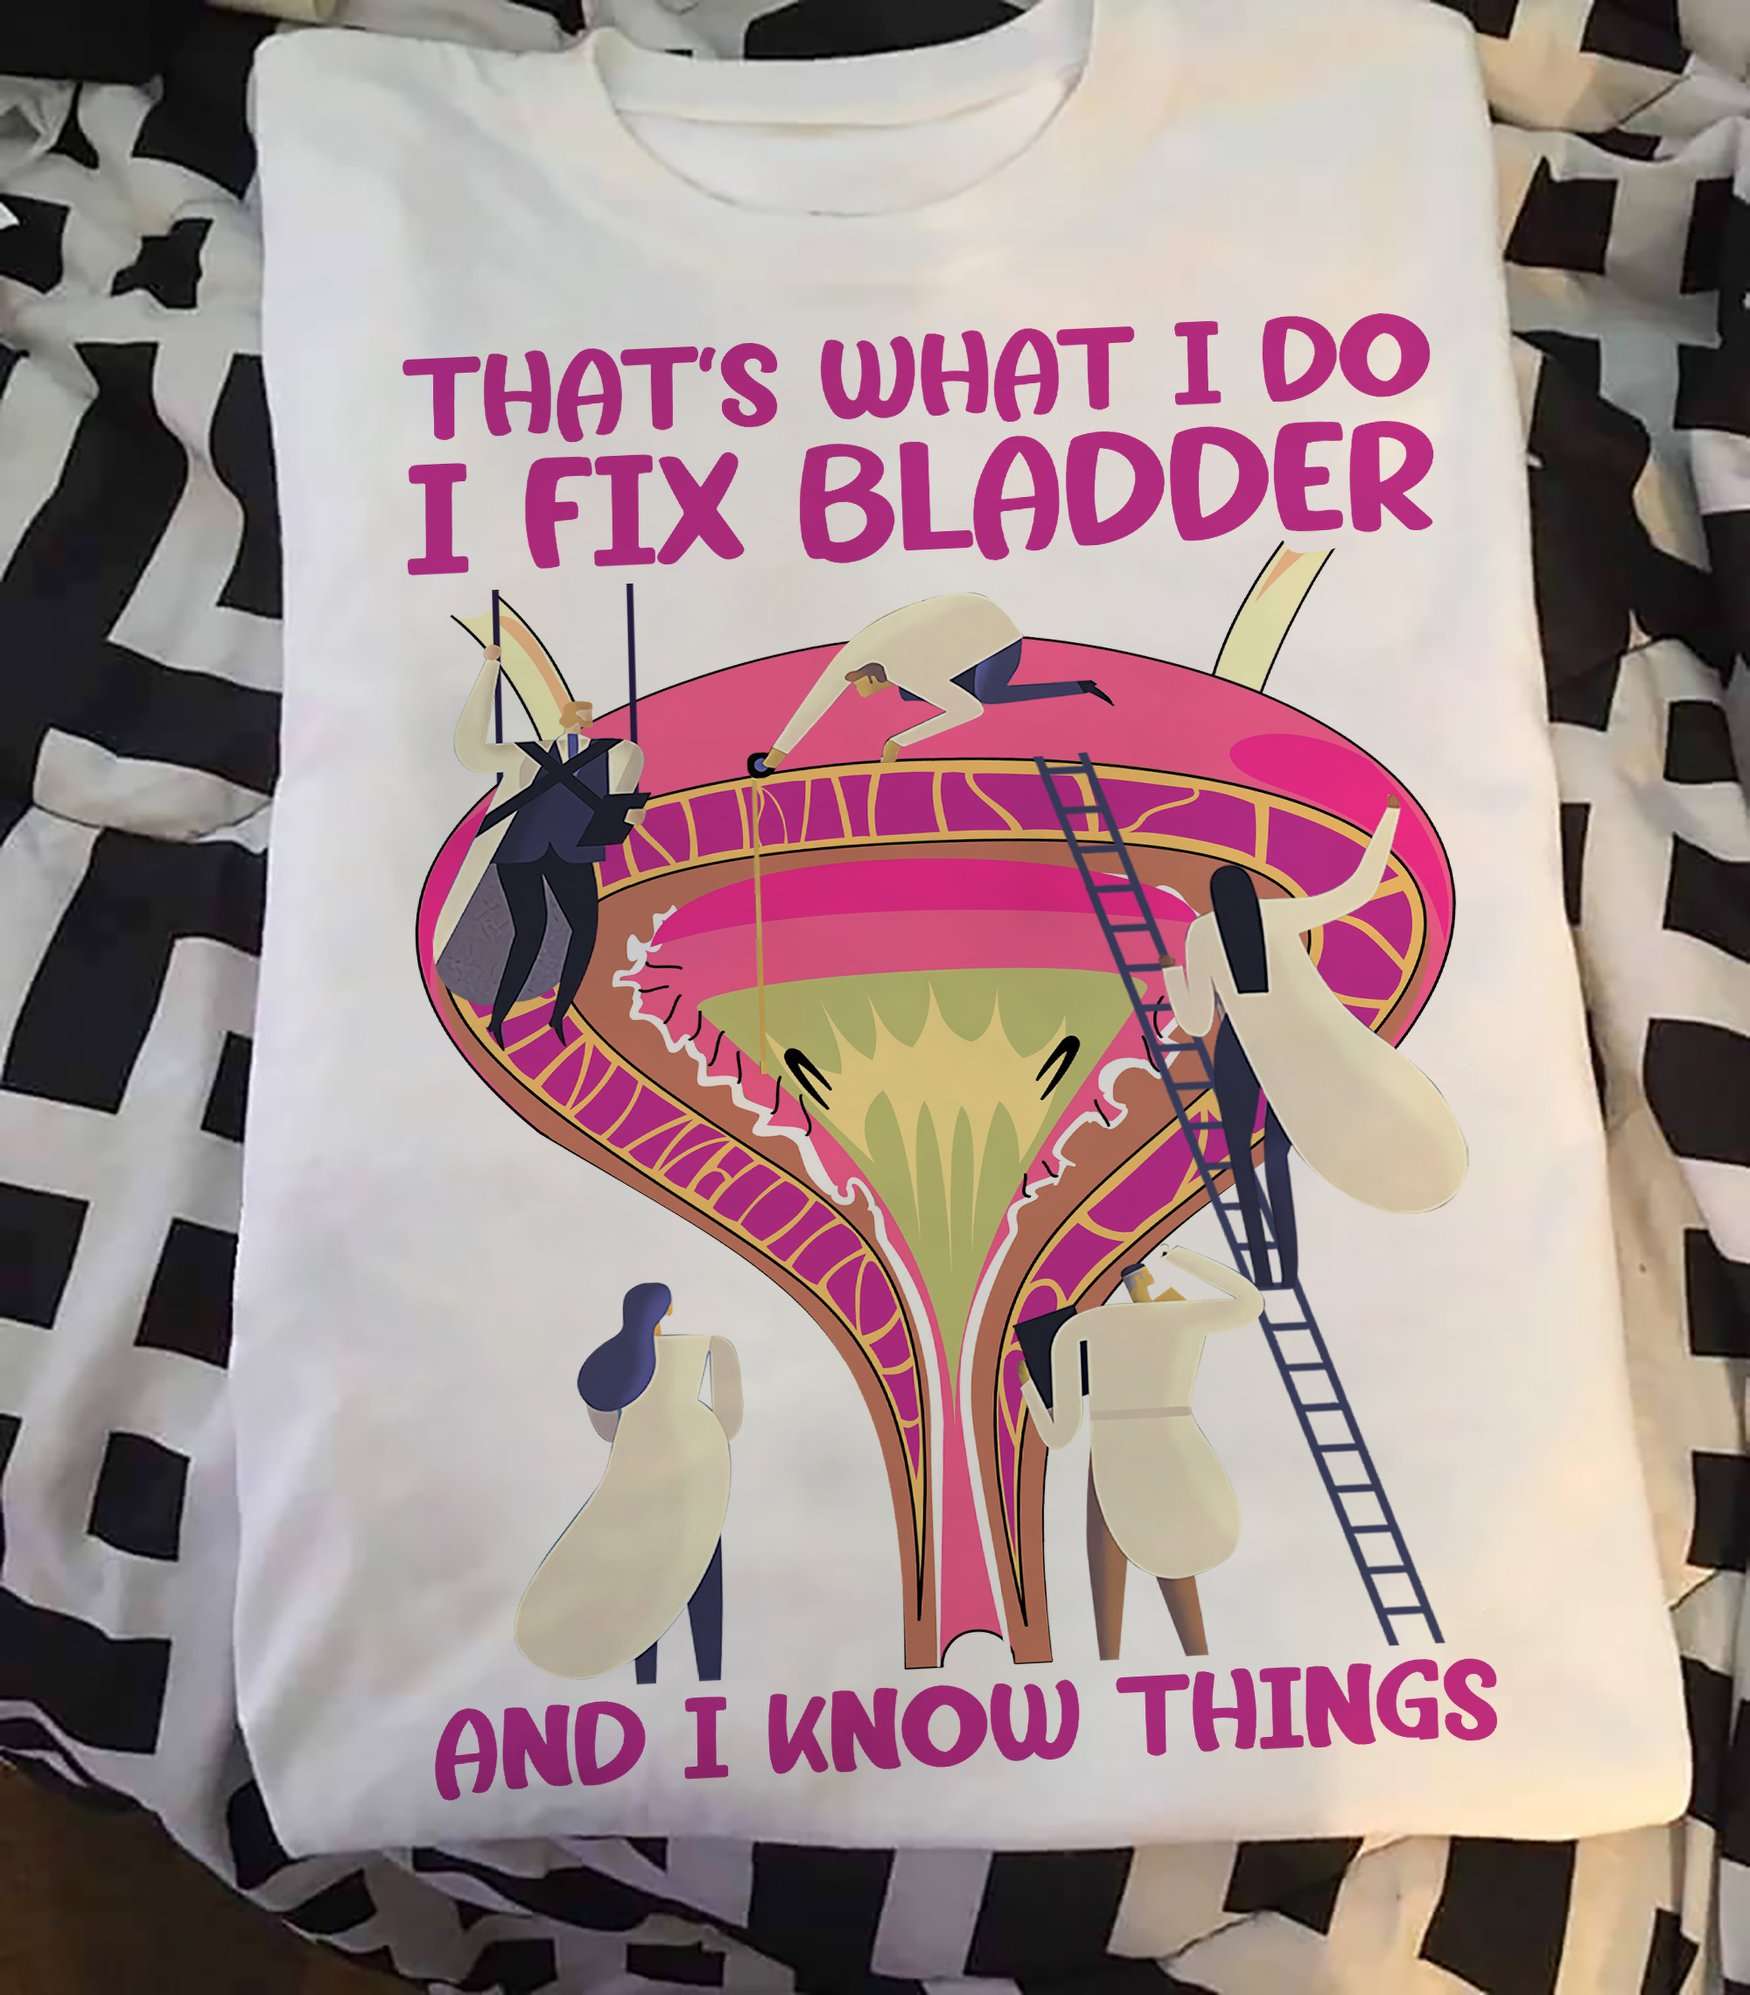 That's what I do I fix bladder and I know things - Bladder surgery doctor